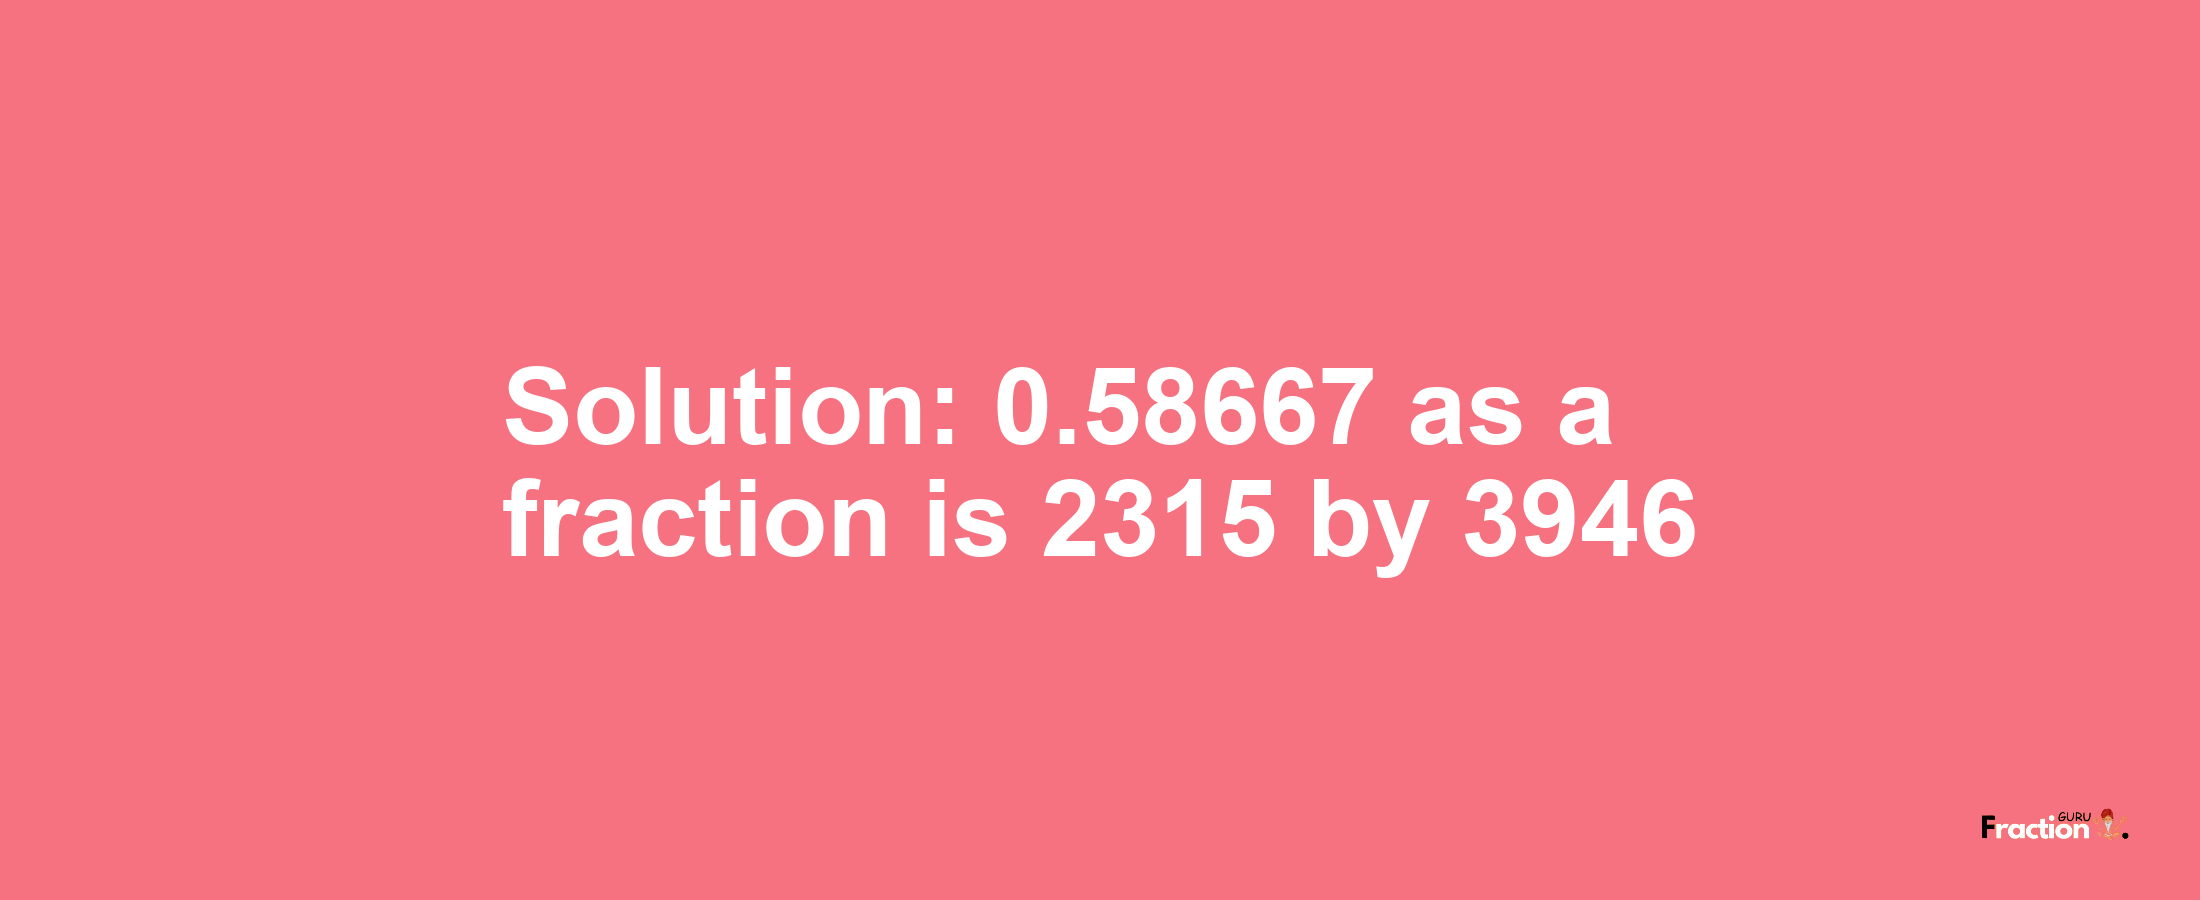 Solution:0.58667 as a fraction is 2315/3946